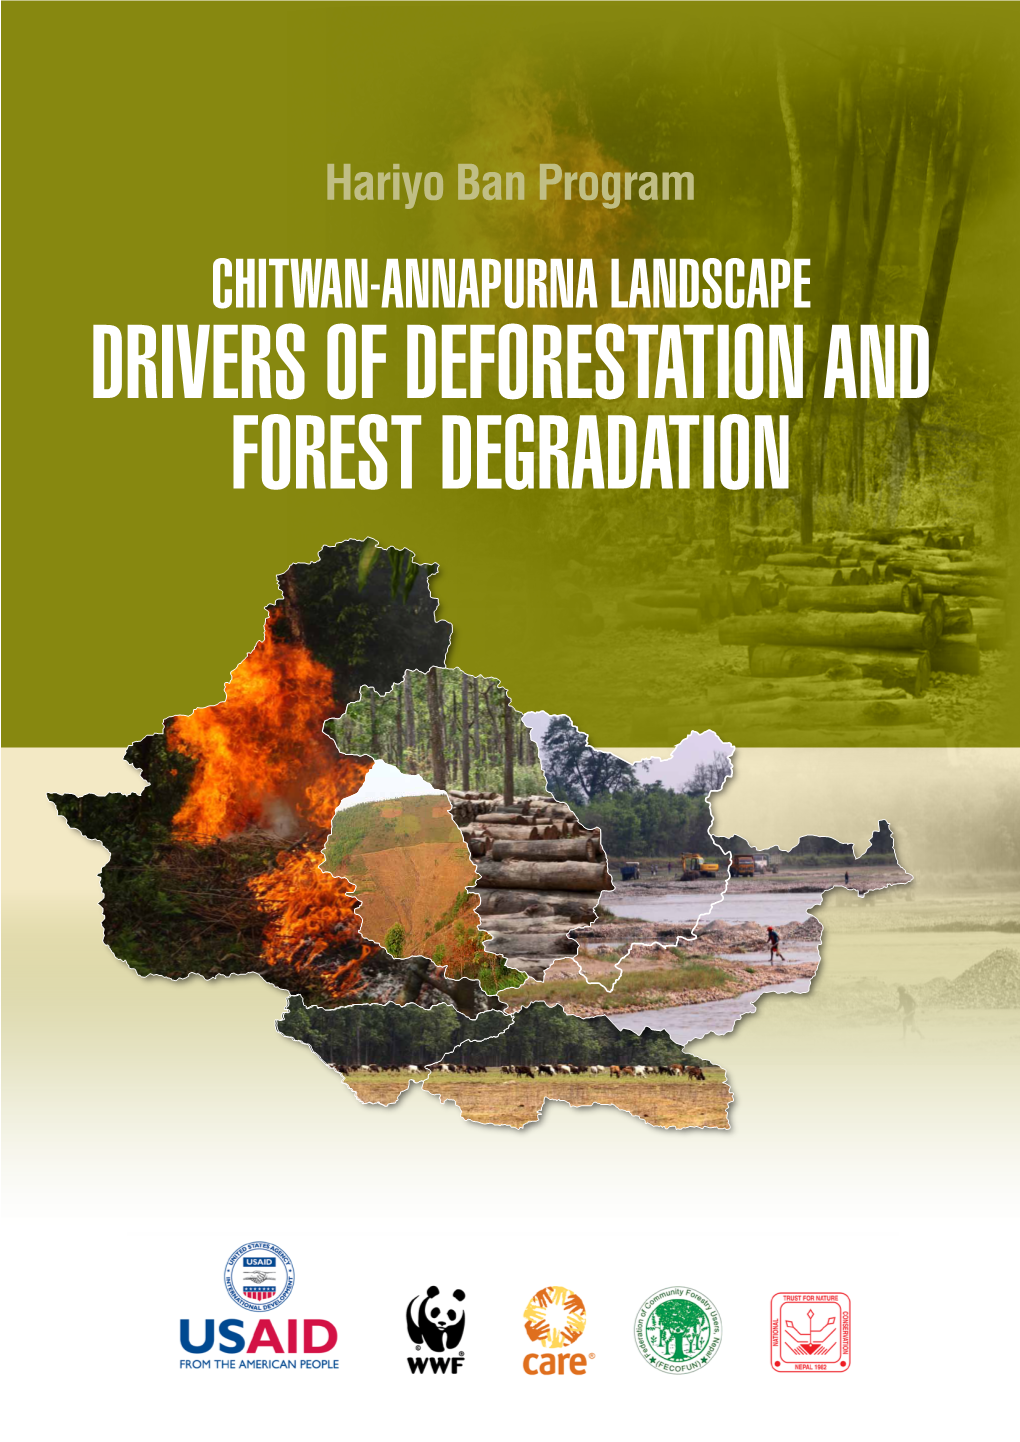 Drivers of Deforestation and Forest Degradation